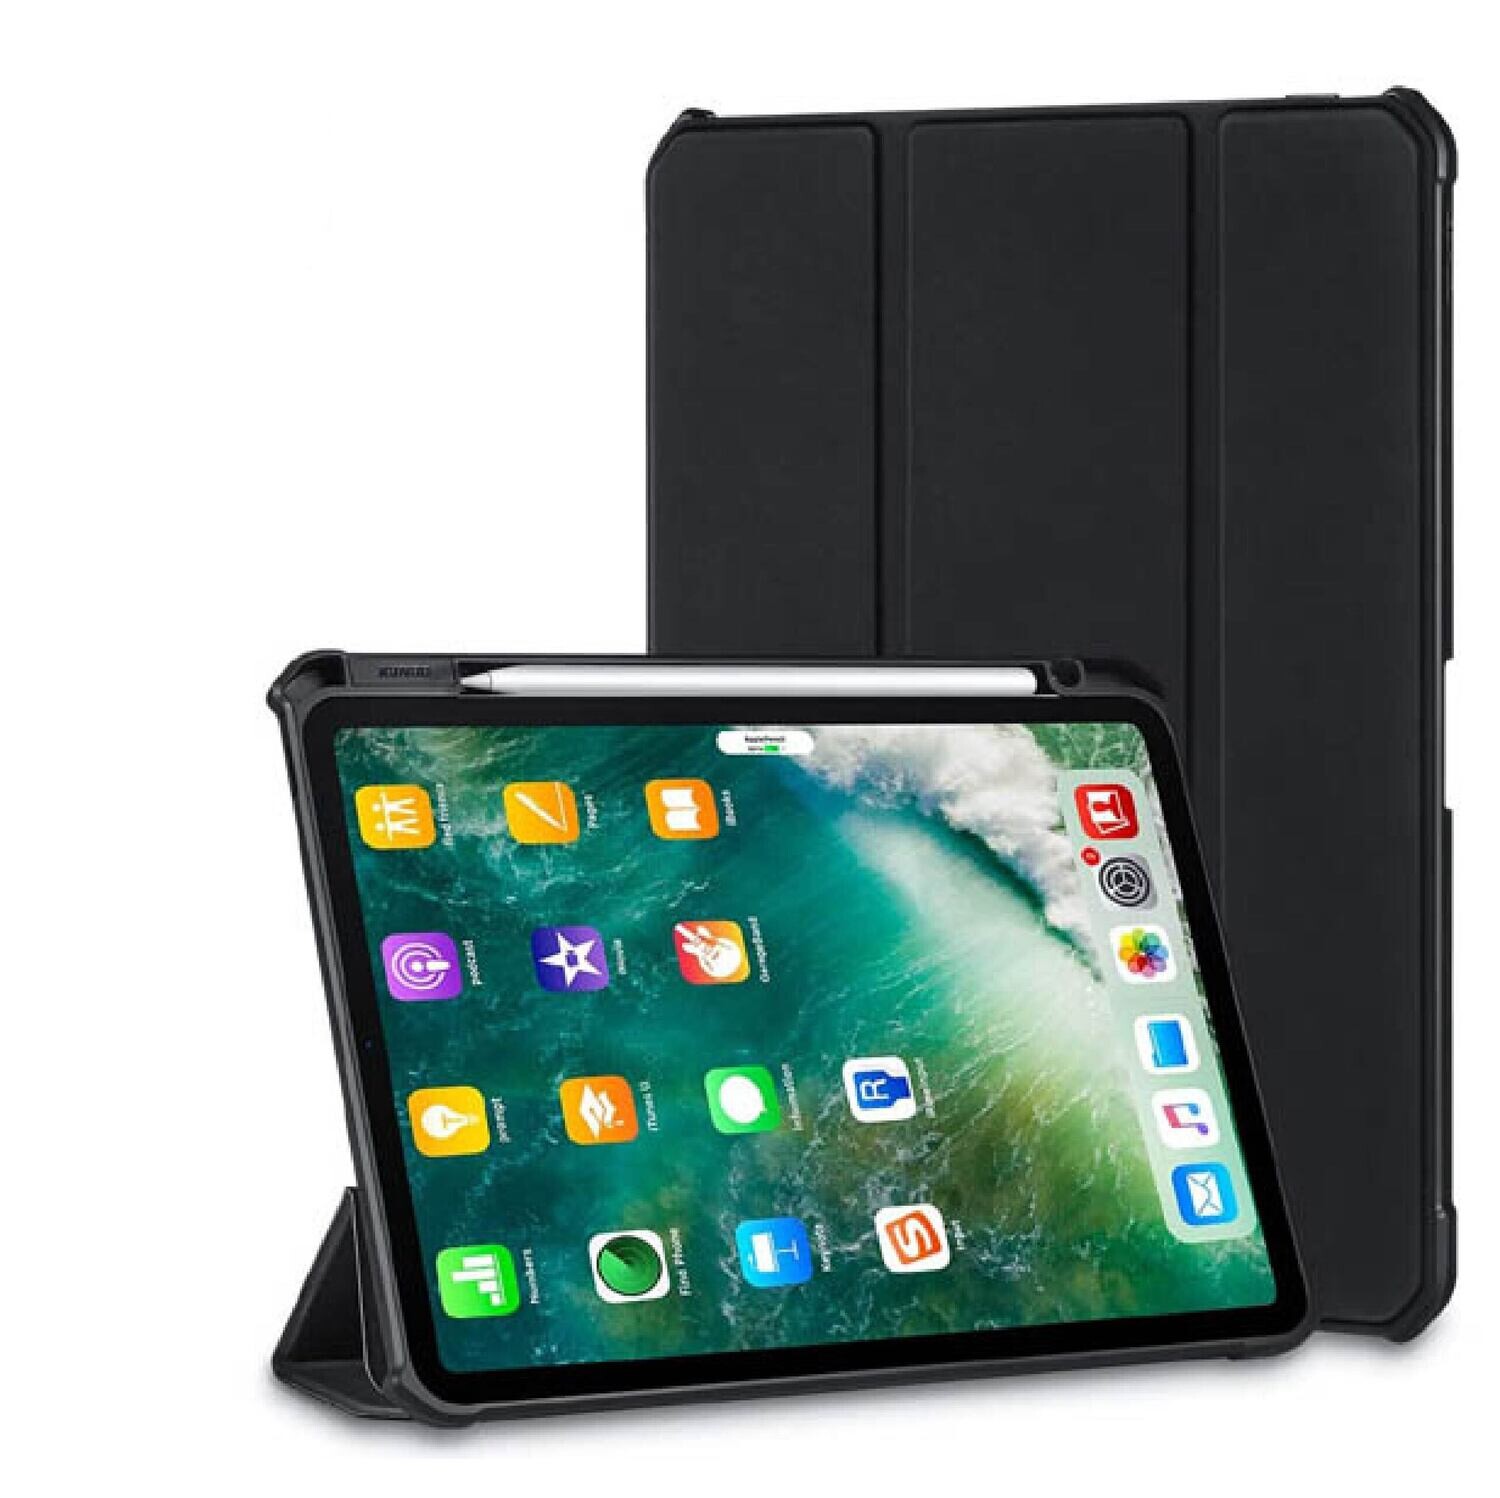 Xundd Beatle Leather Series Flip Case For iPad Air (2020), Color: Black